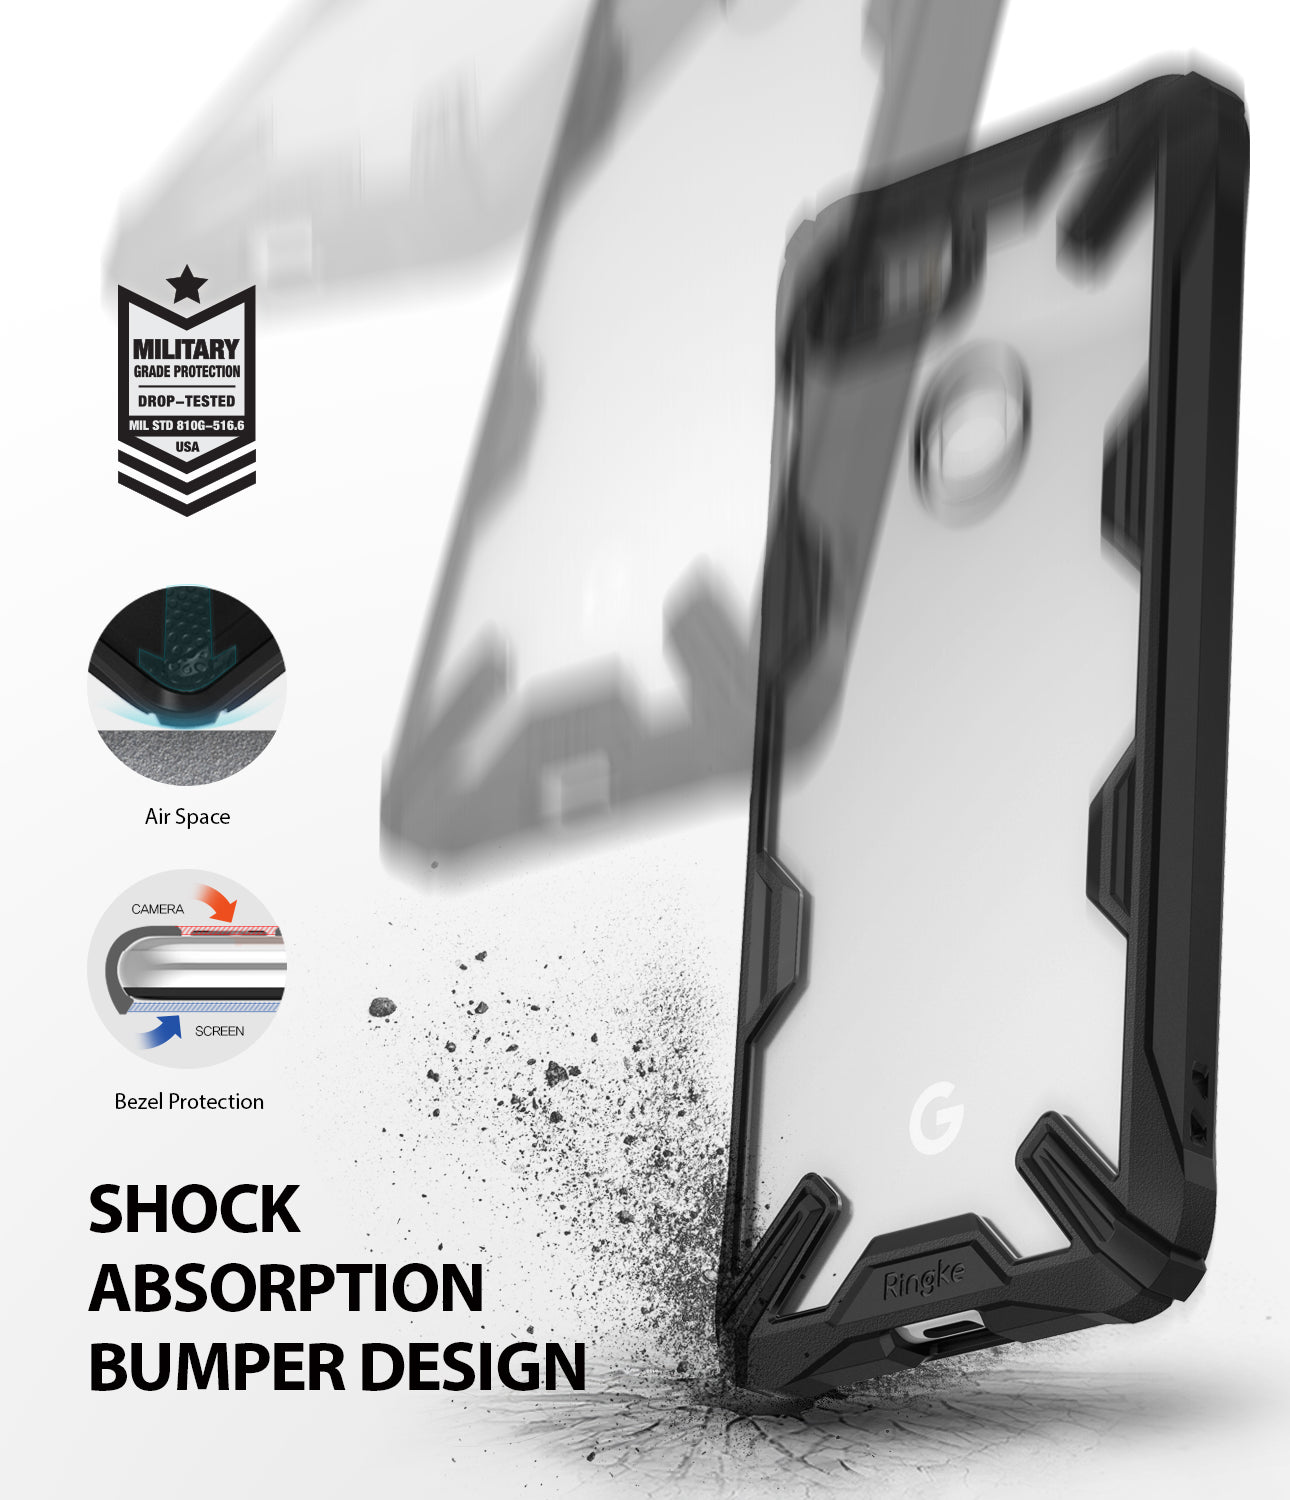 ringke fusion-x rugged heavy duty clear back case cover for google pixel 3 main shockproof protection